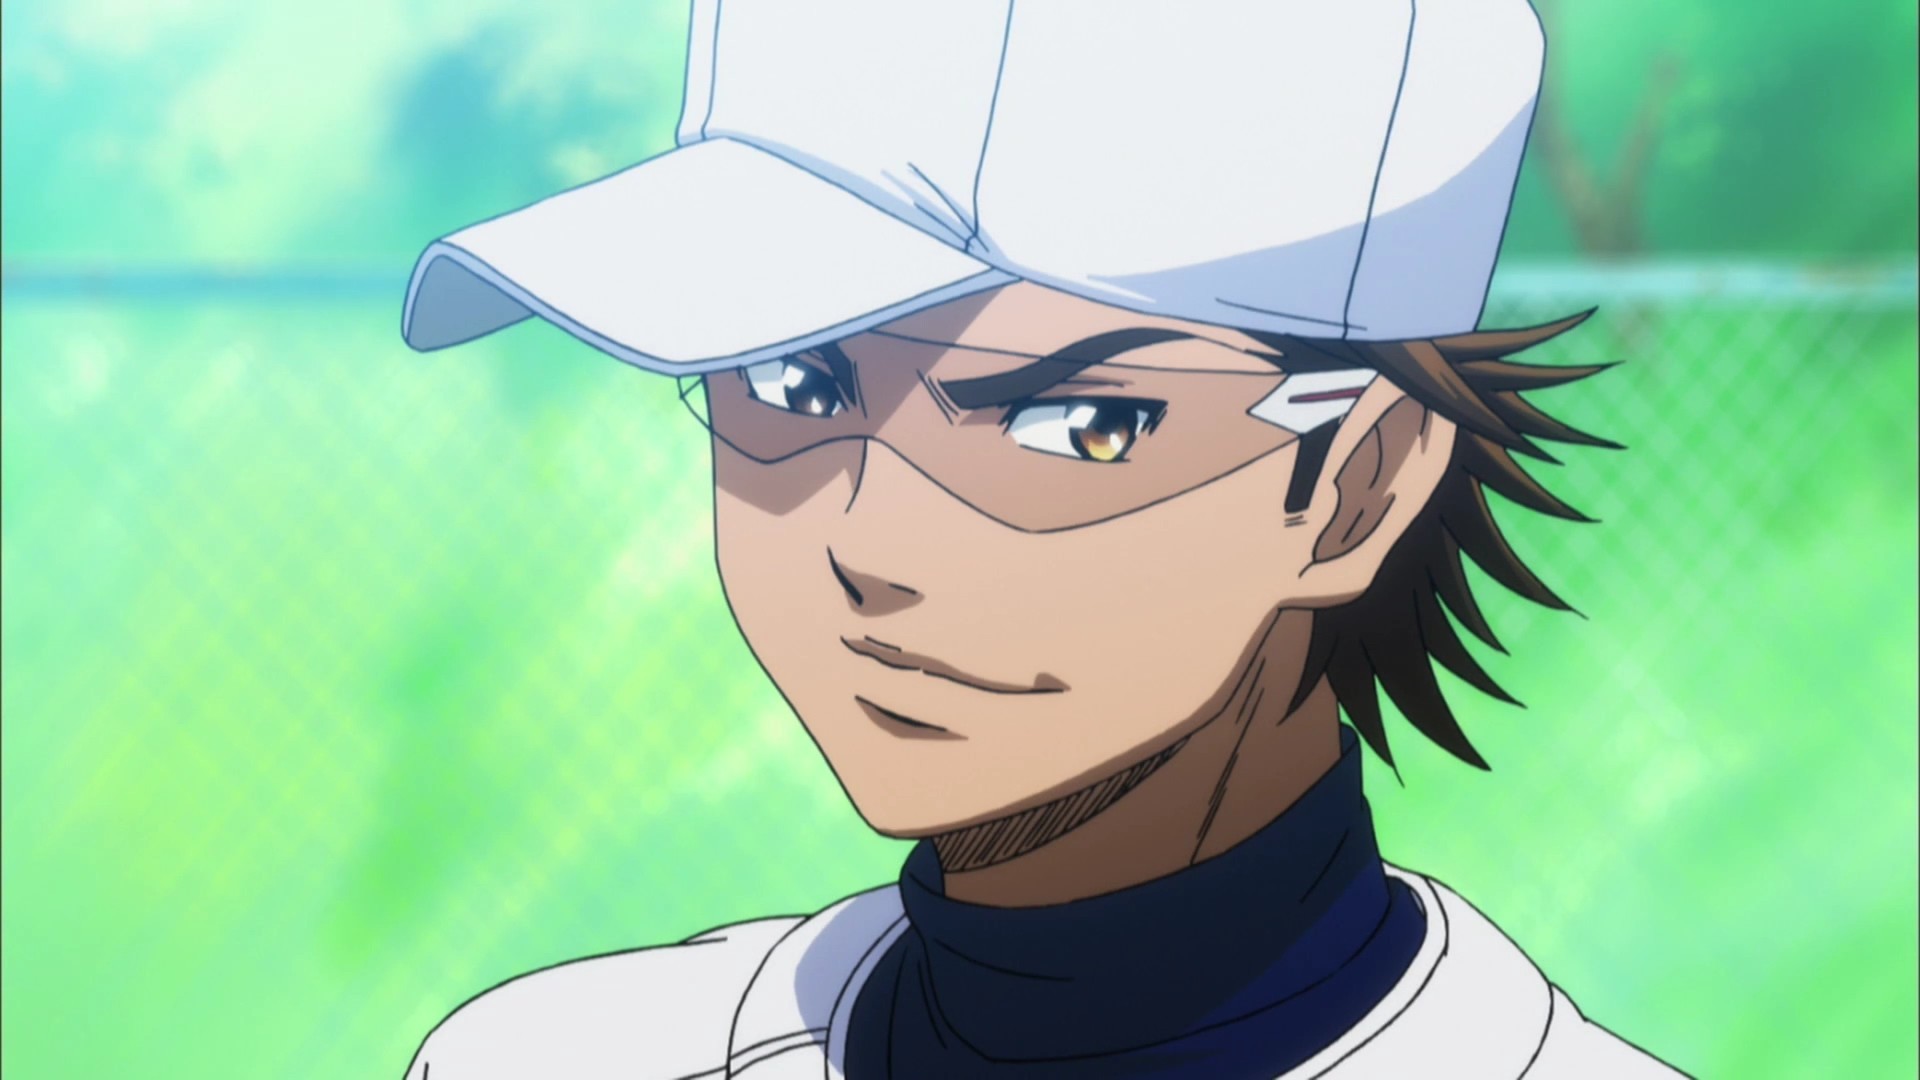 1920x1080 Displaying 16 Images For Ace Of Diamond Anime Wallpaper 